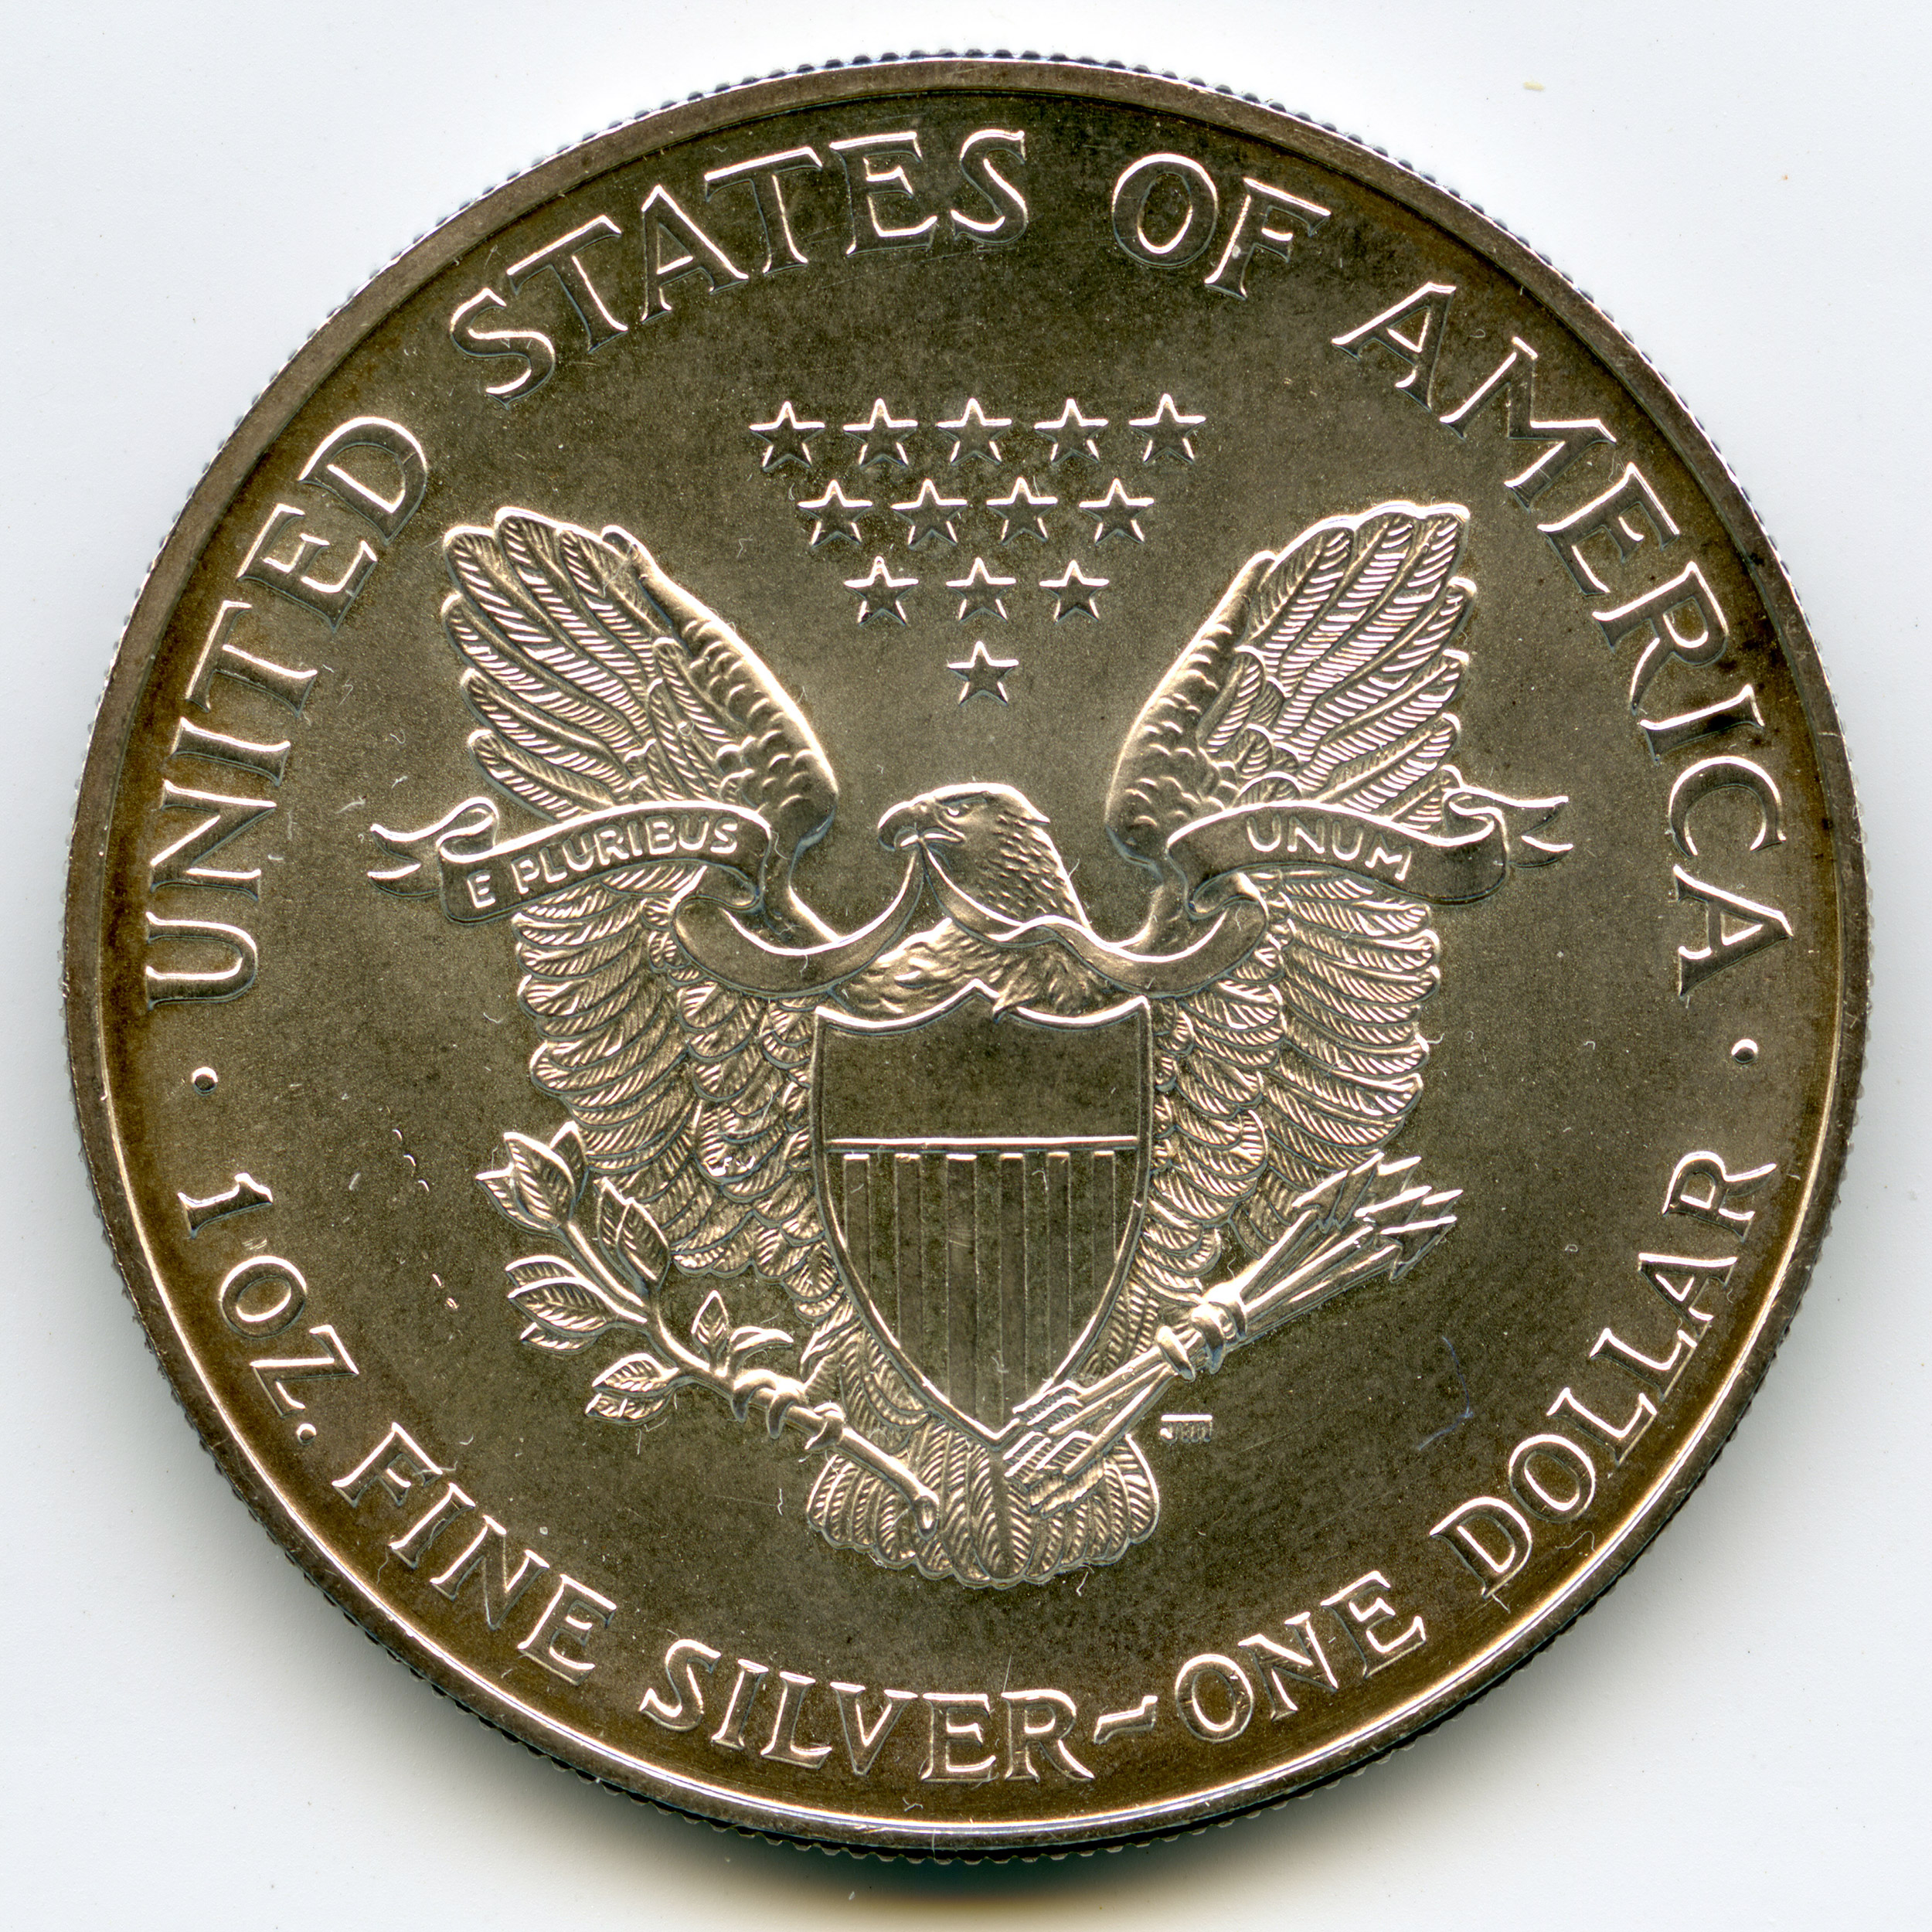 Silver Eagle revers